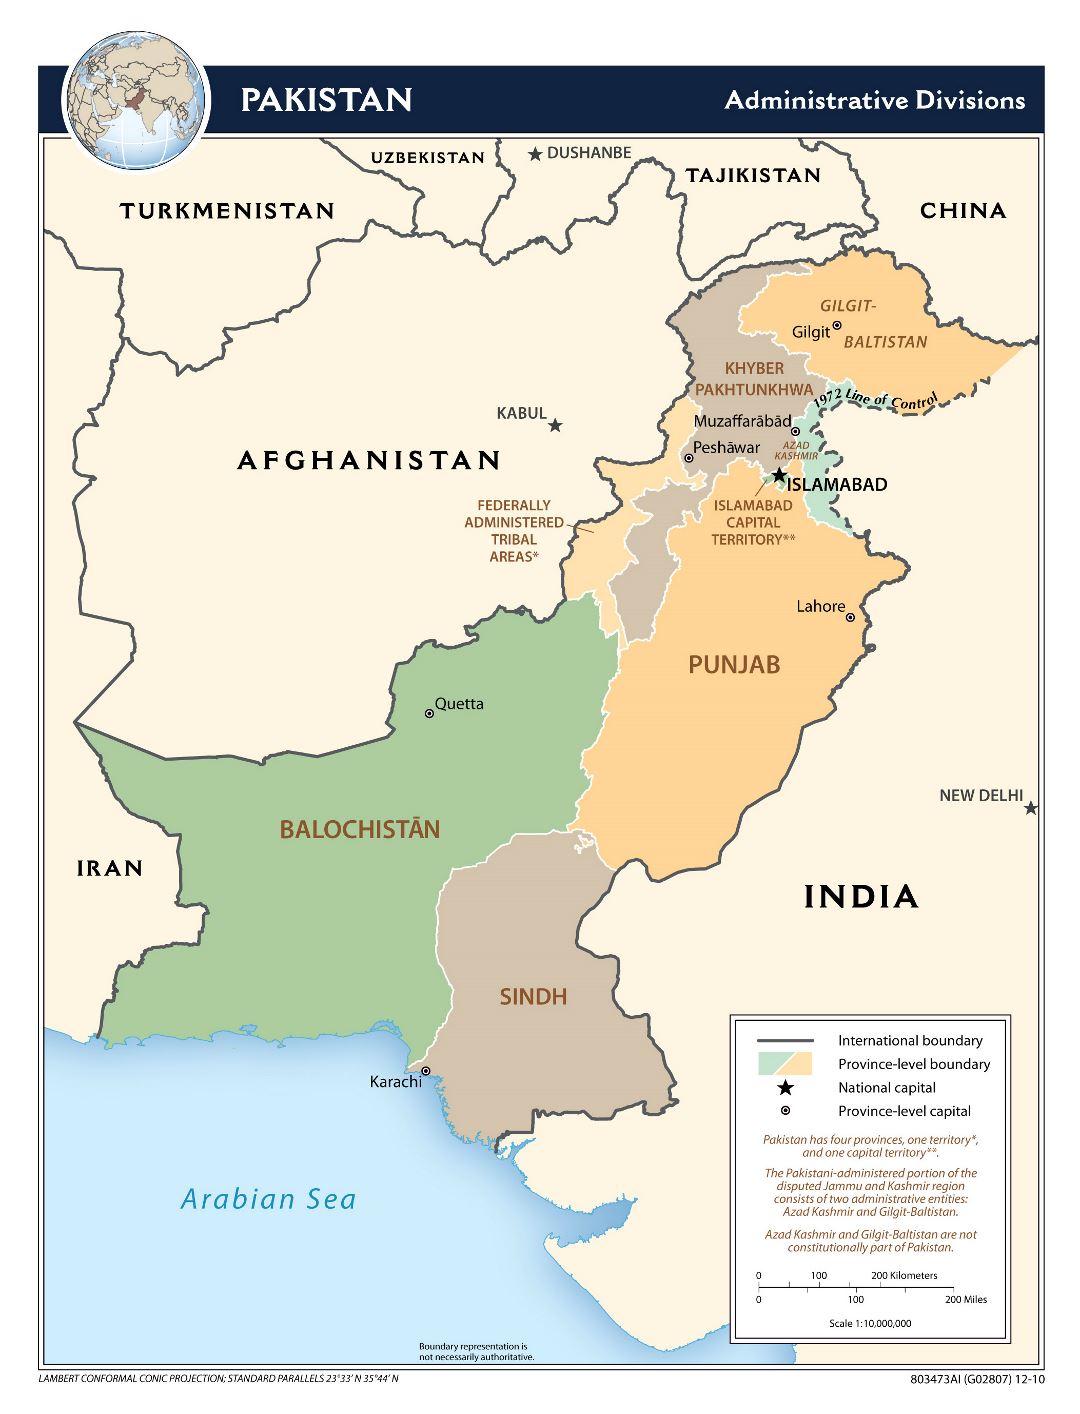 Large administrative divisions map of Pakistan - 2010